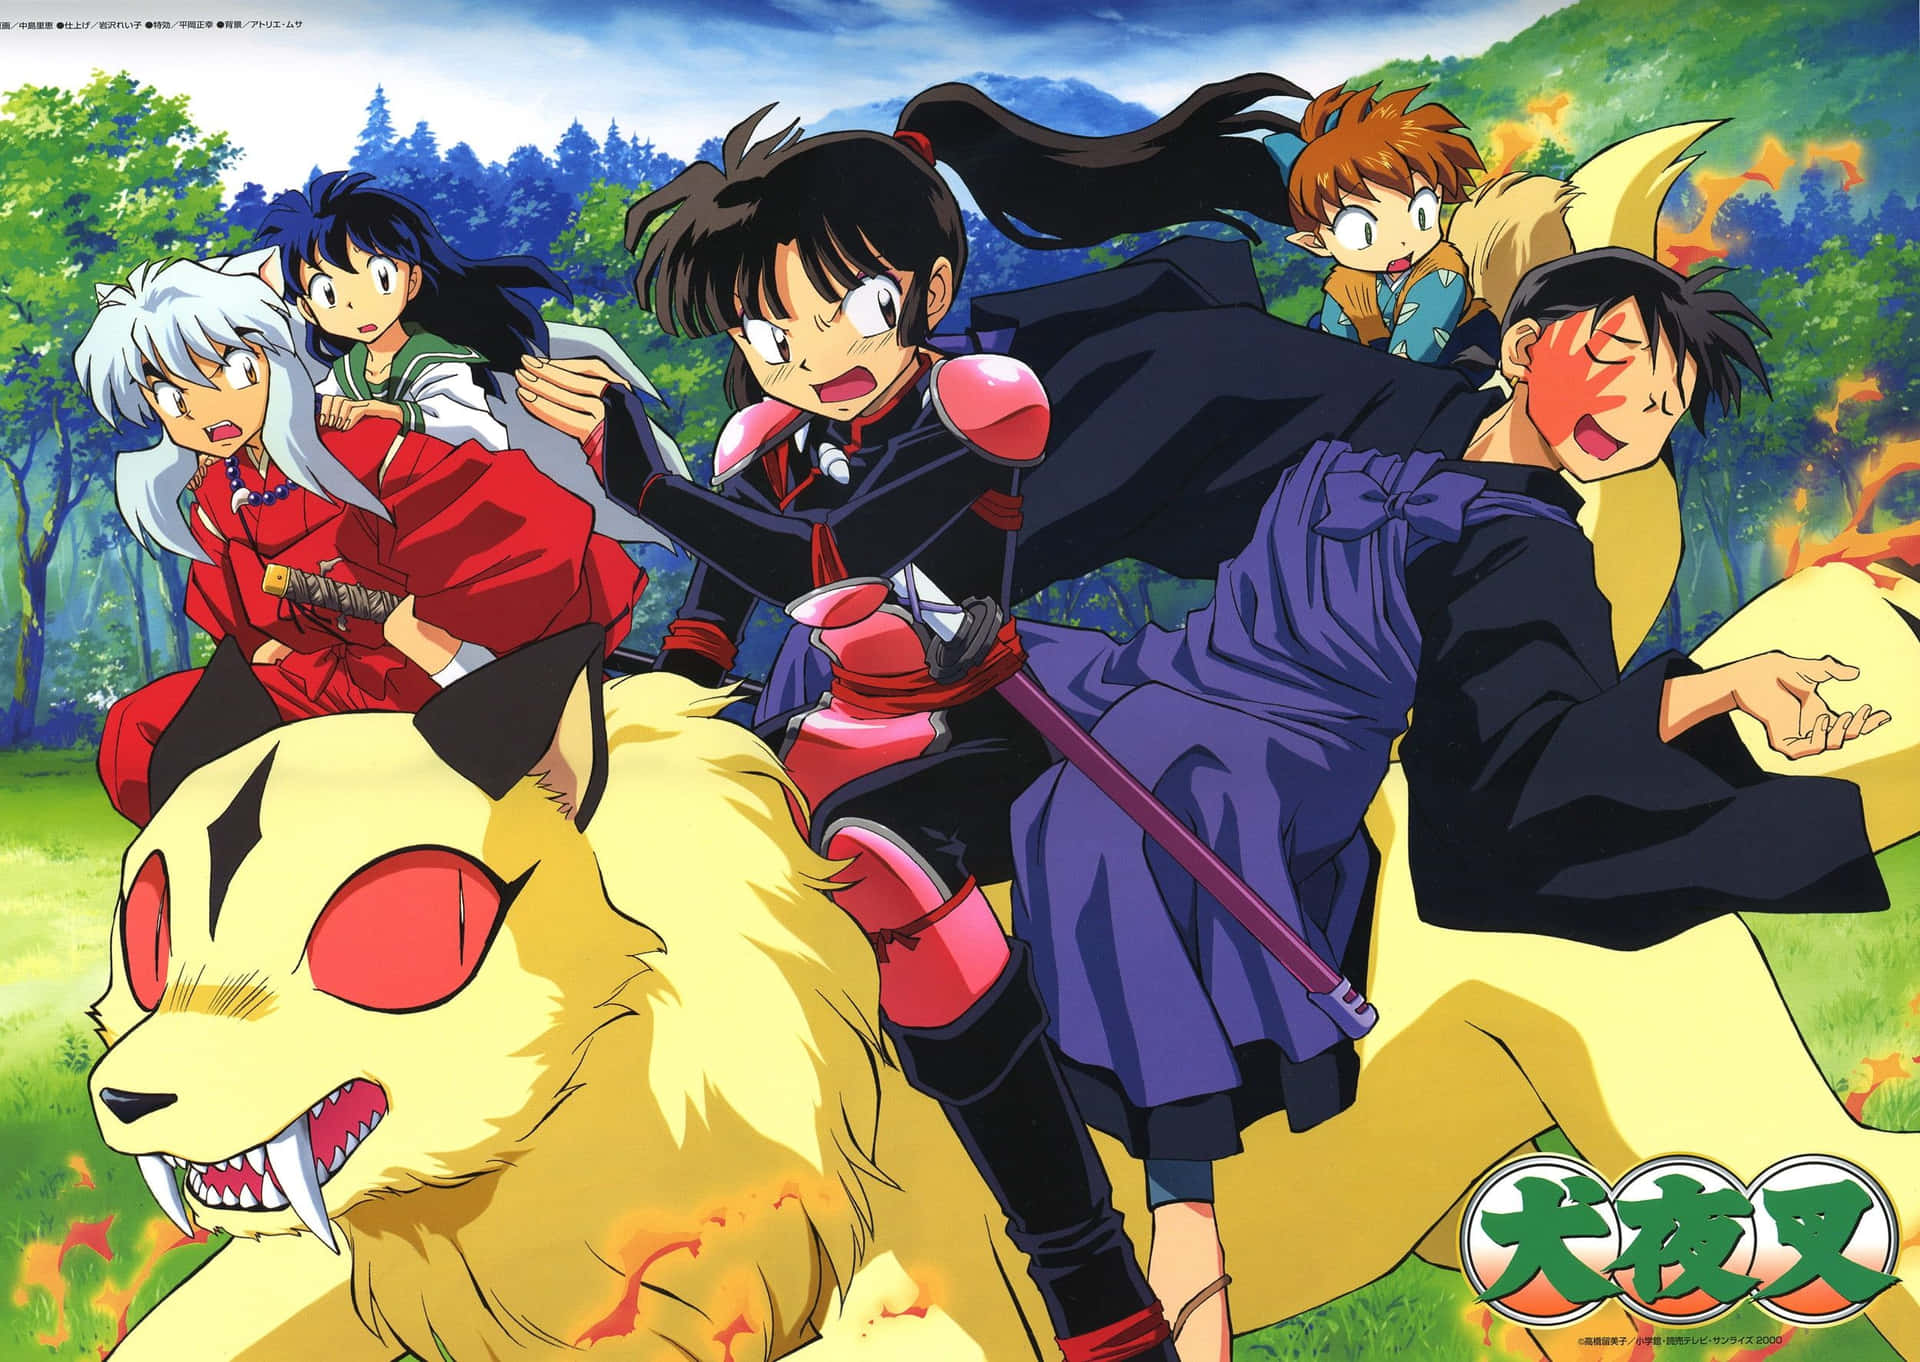 Take your adventure to the next level with Inuyasha in 4K Wallpaper